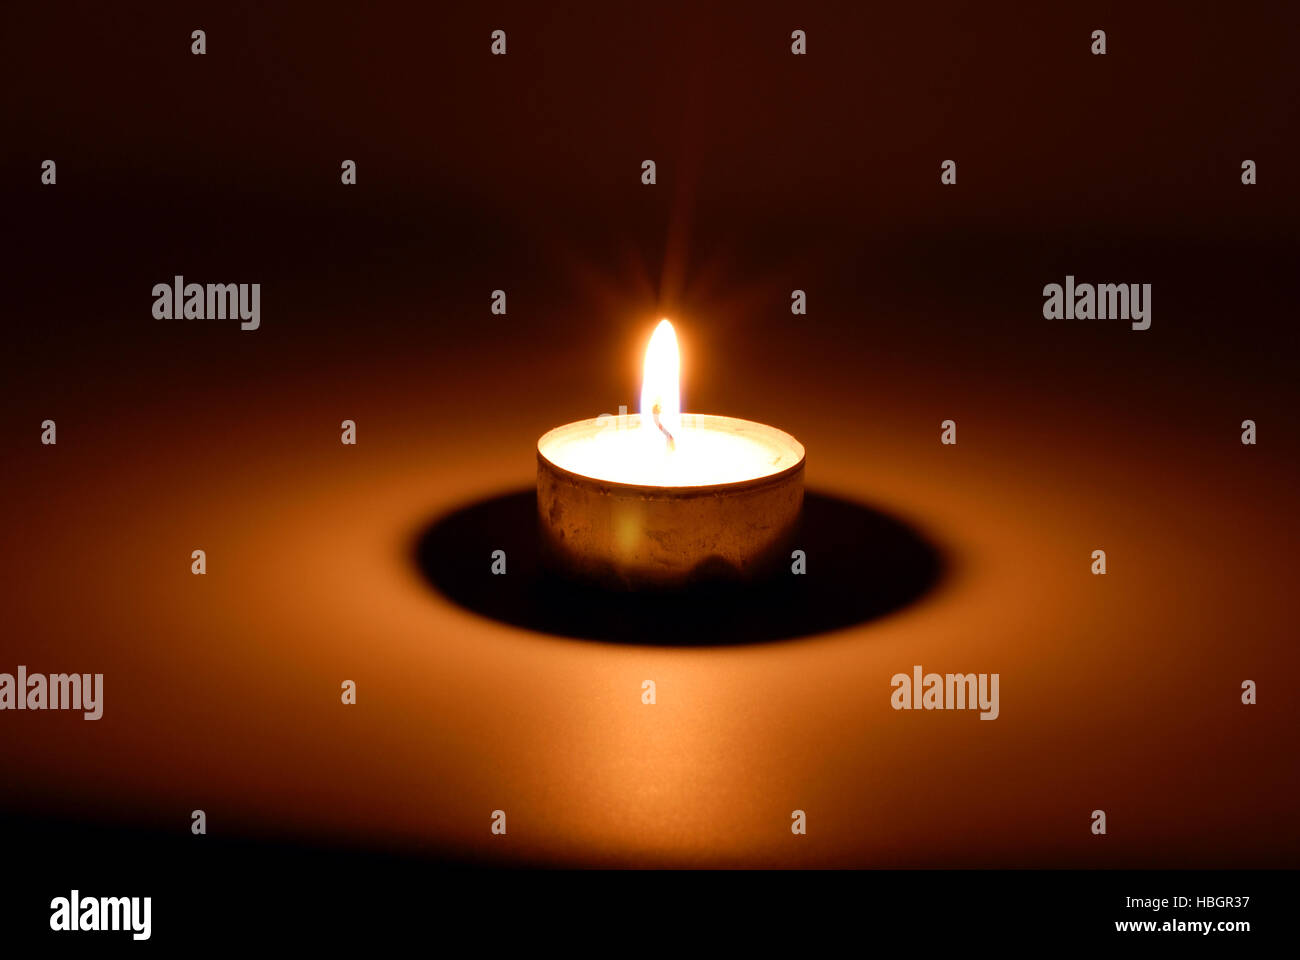 Burning candle in darkness Stock Photo